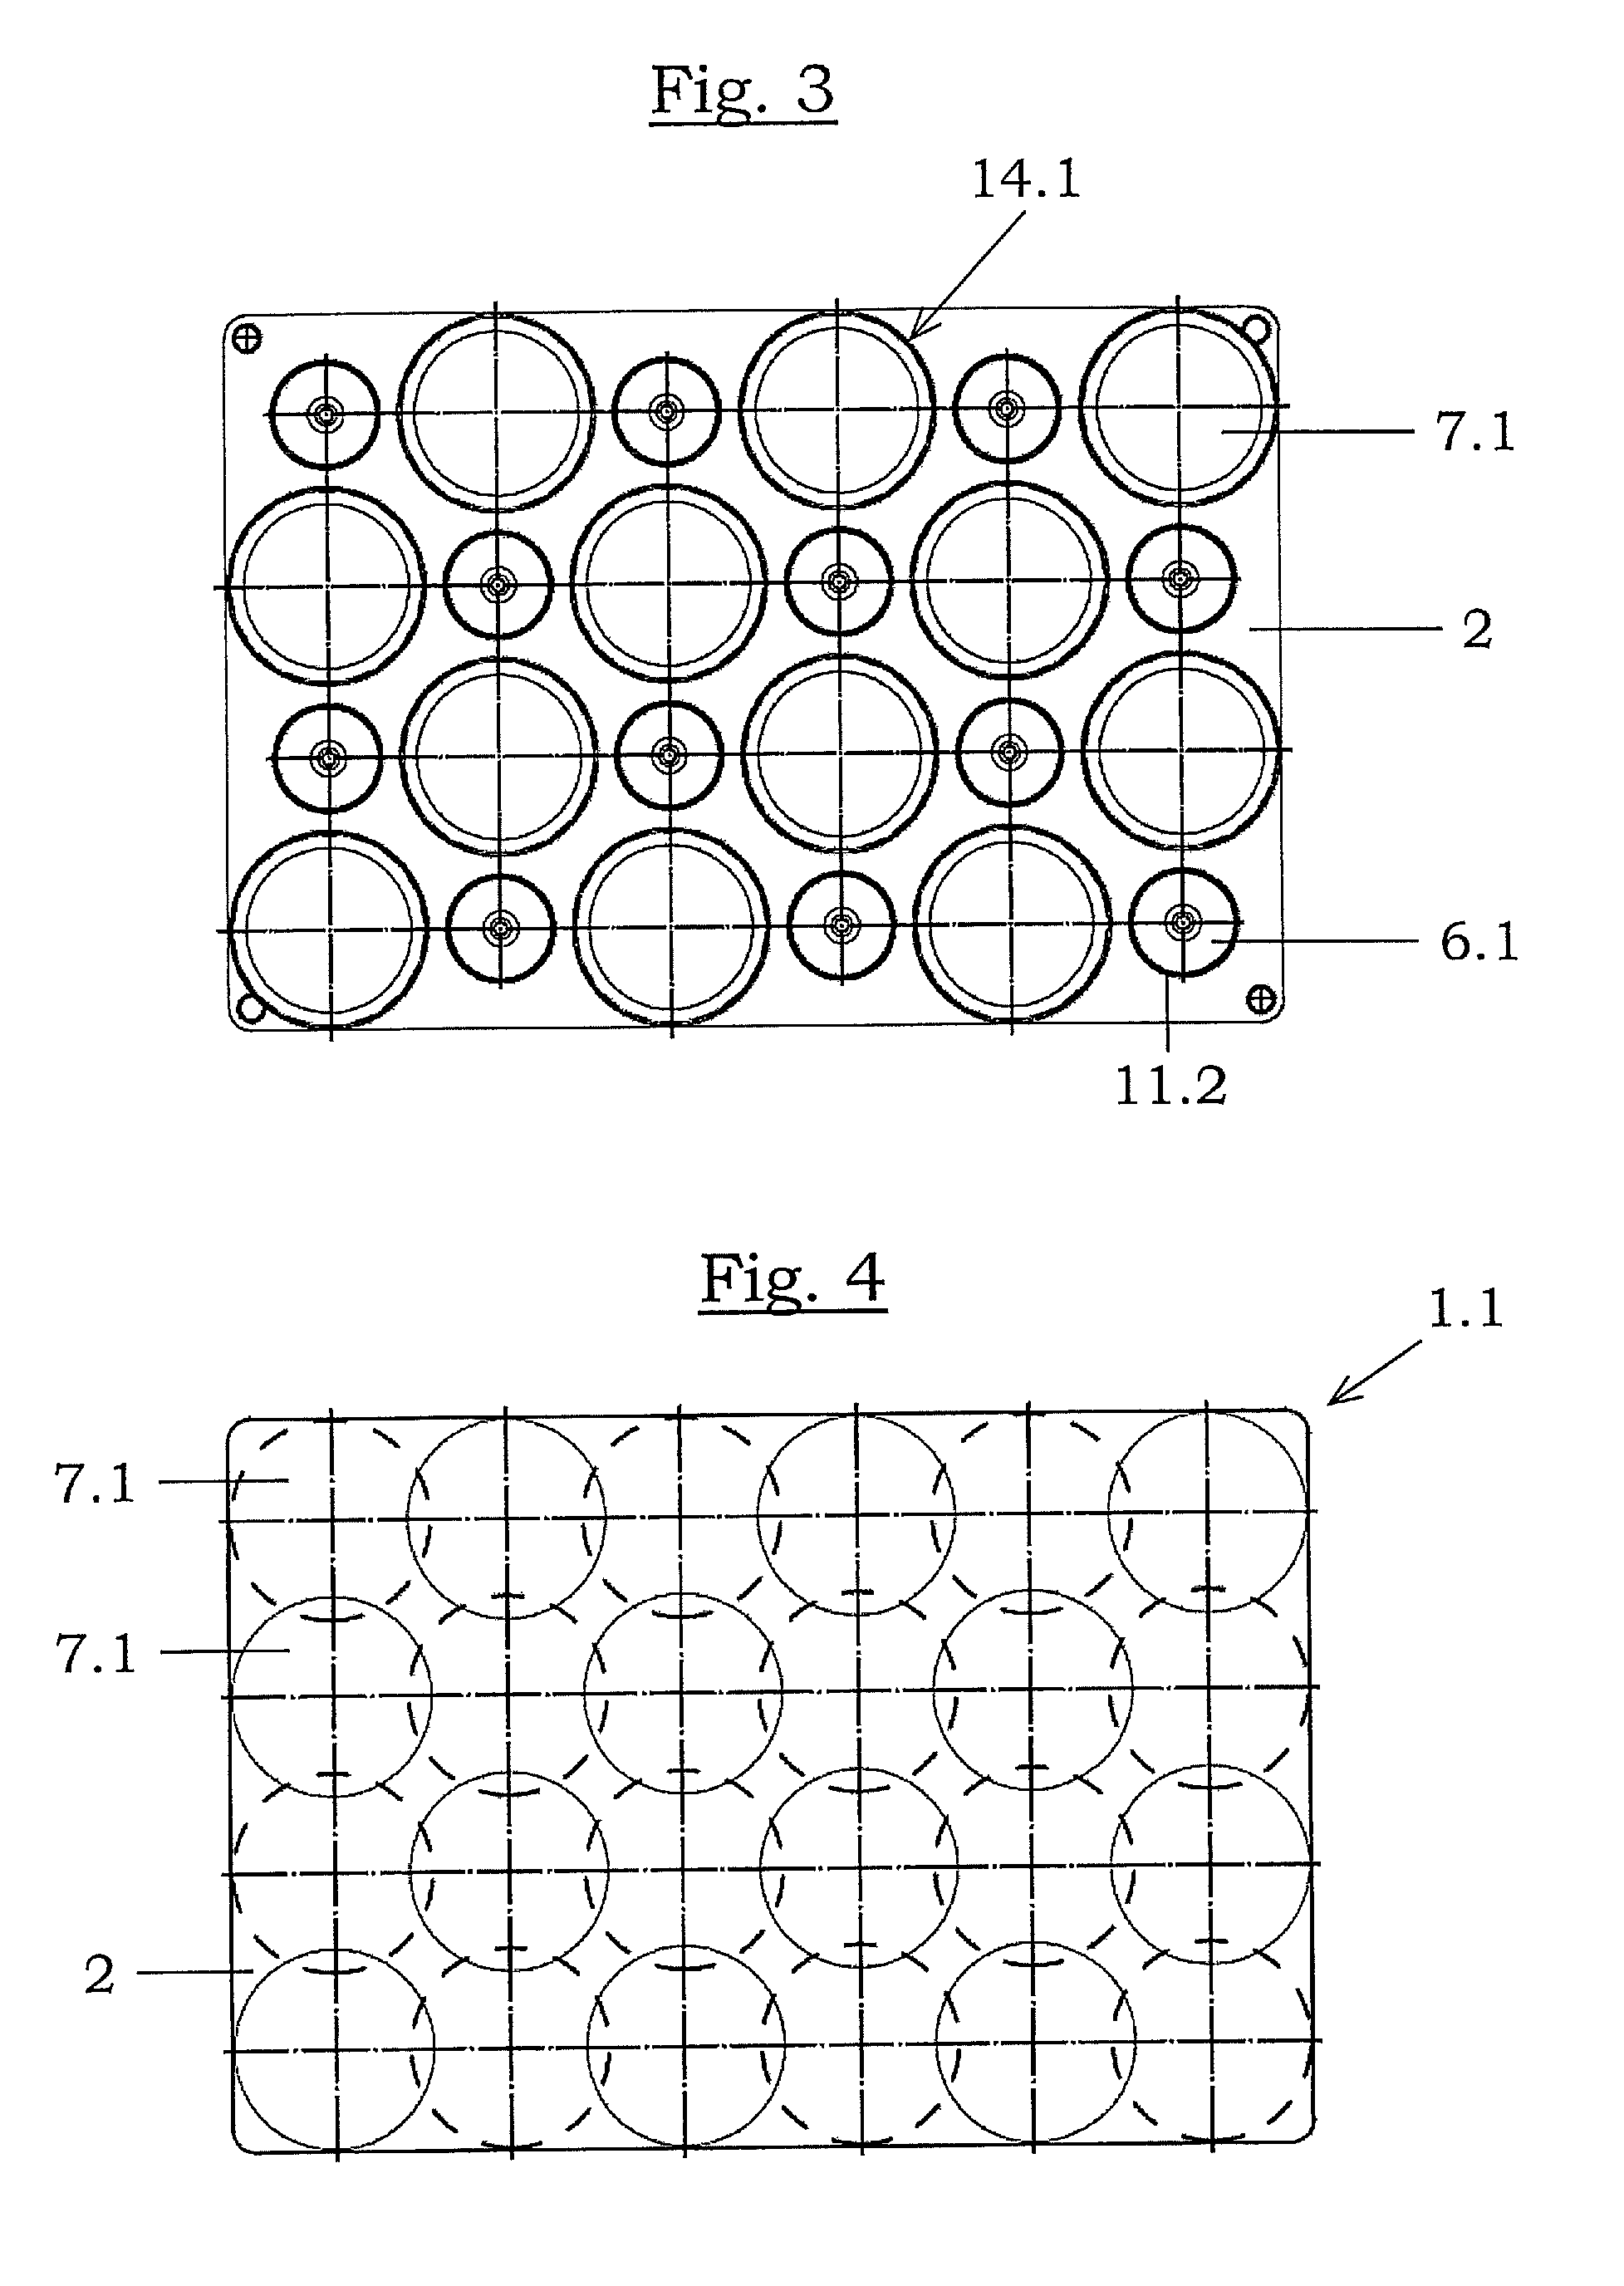 Transport Unit comprising Retaining Plates and Containers and Working Unit